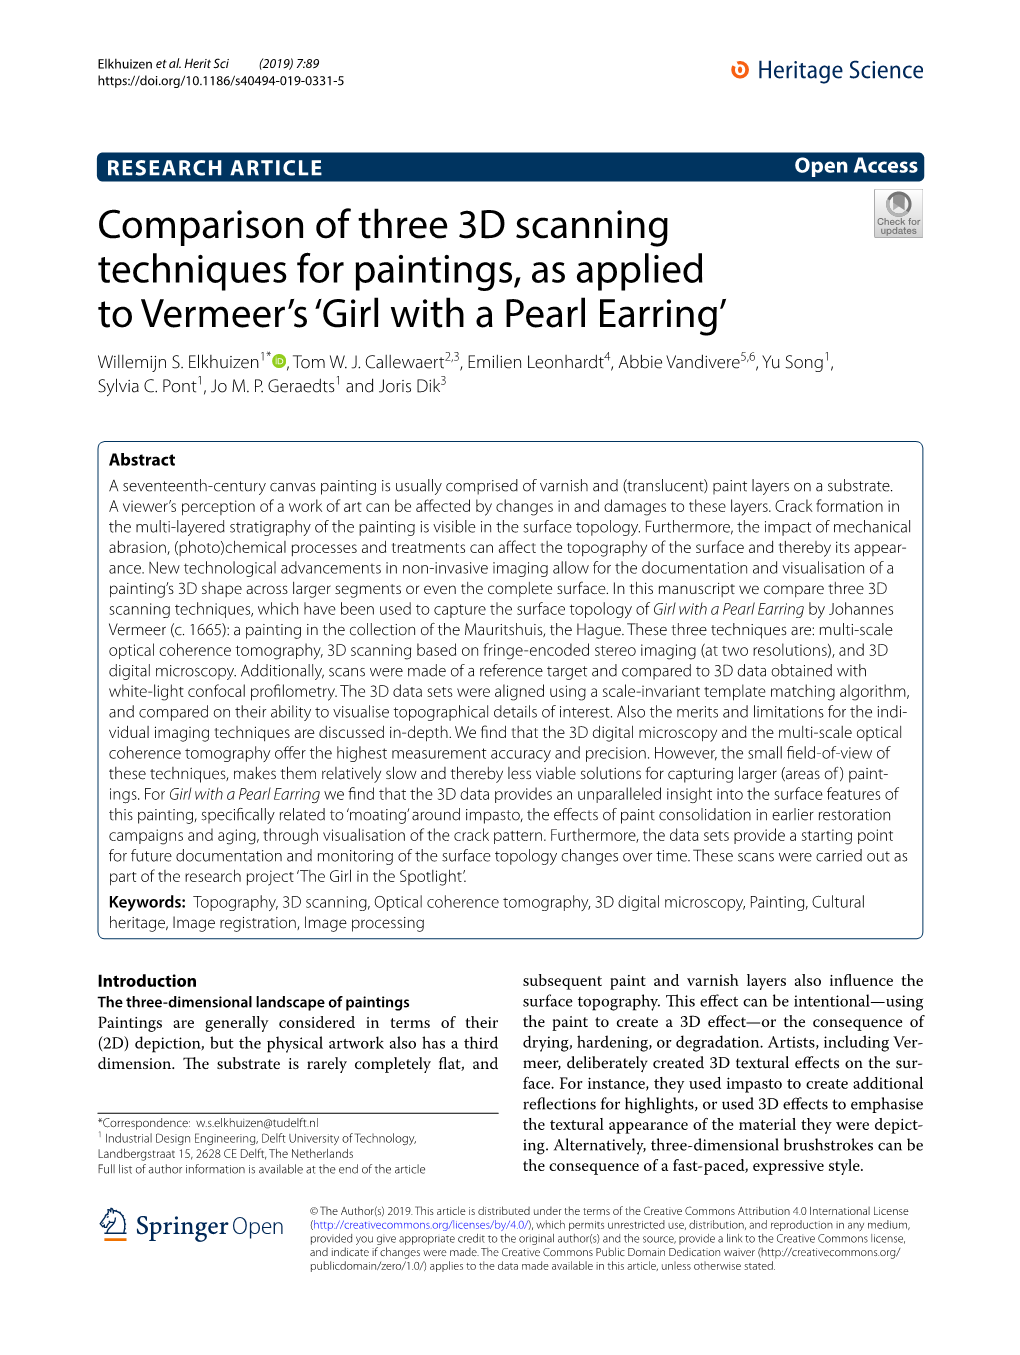 Comparison of Three 3D Scanning Techniques for Paintings, As Applied to Vermeer’S ‘Girl with a Pearl Earring’ Willemijn S